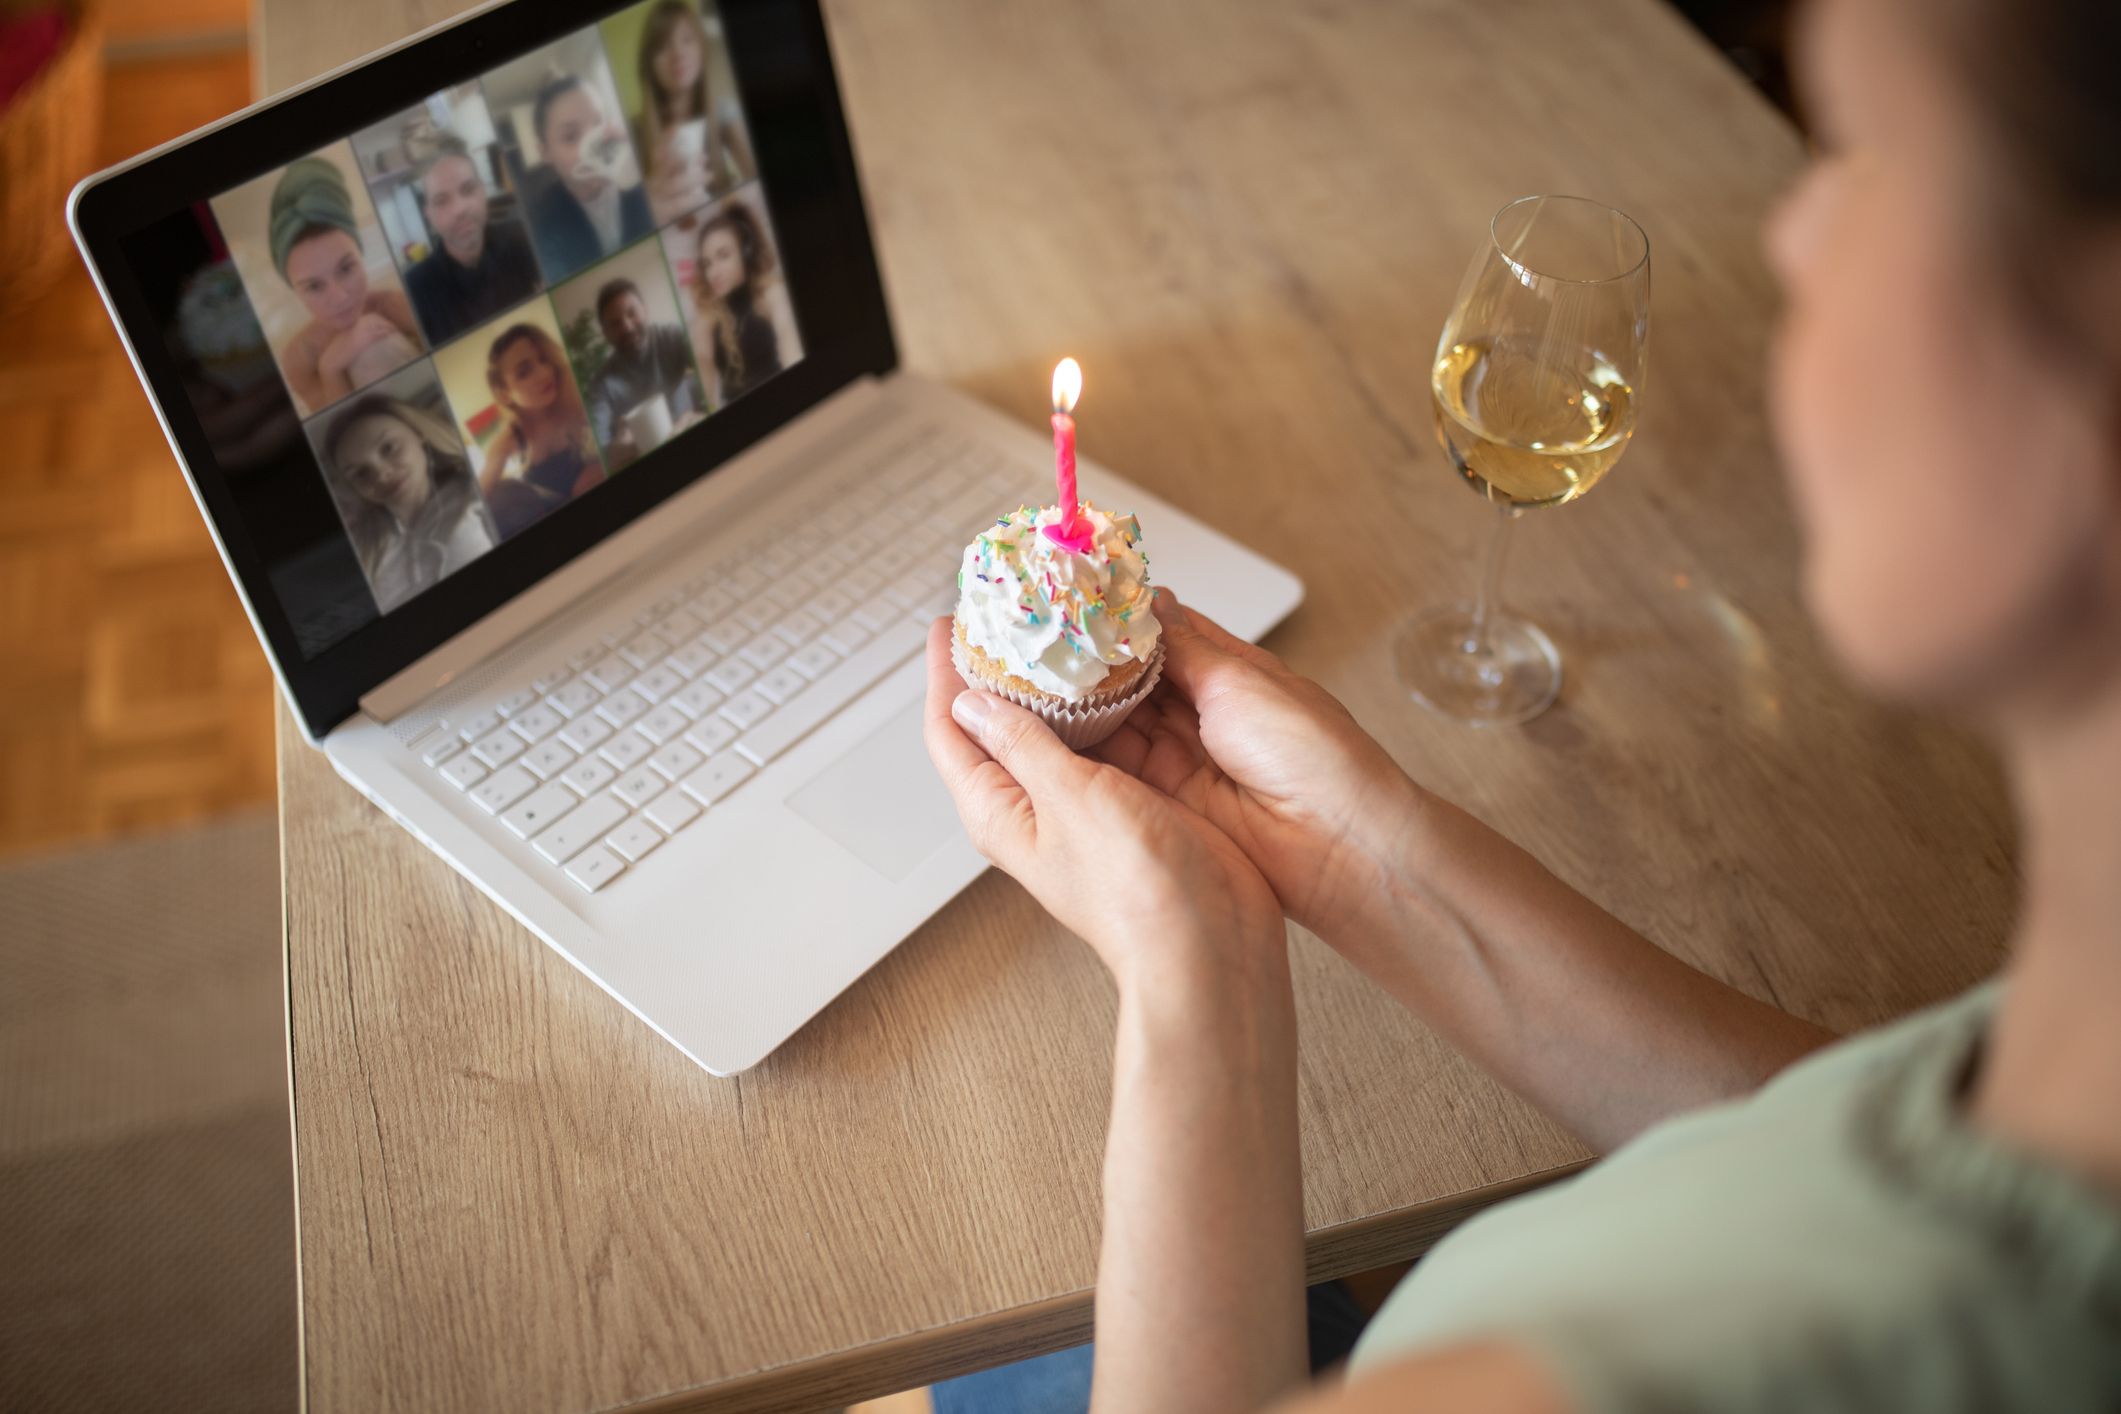 How To Throw a Memorable Virtual Party For Your Friends – 5 Fun Activities